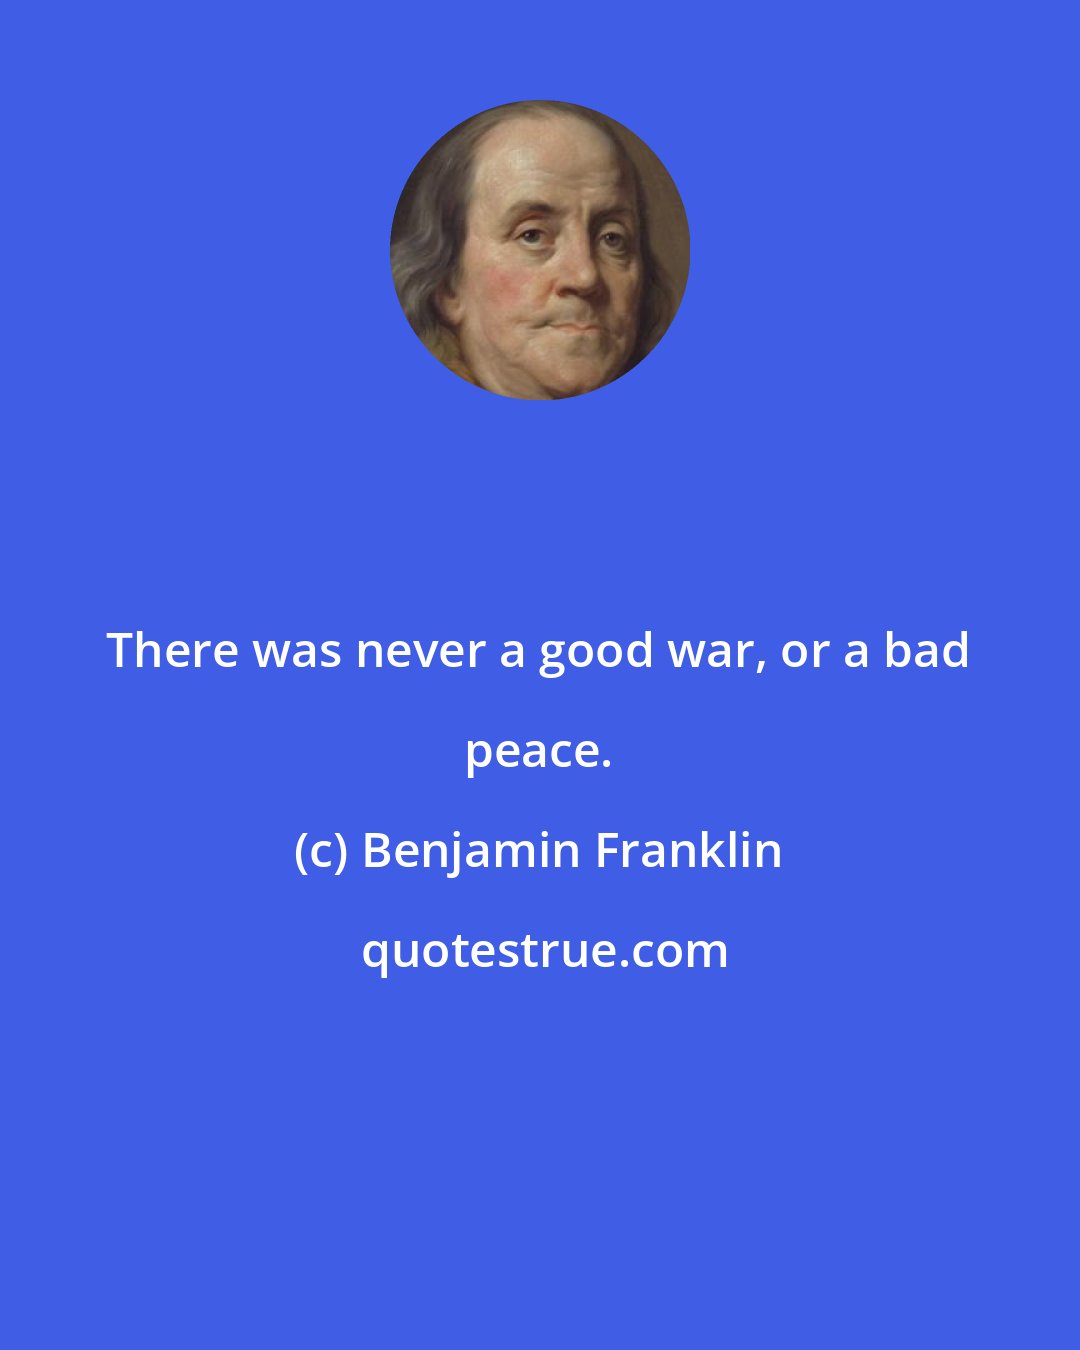 Benjamin Franklin: There was never a good war, or a bad peace.